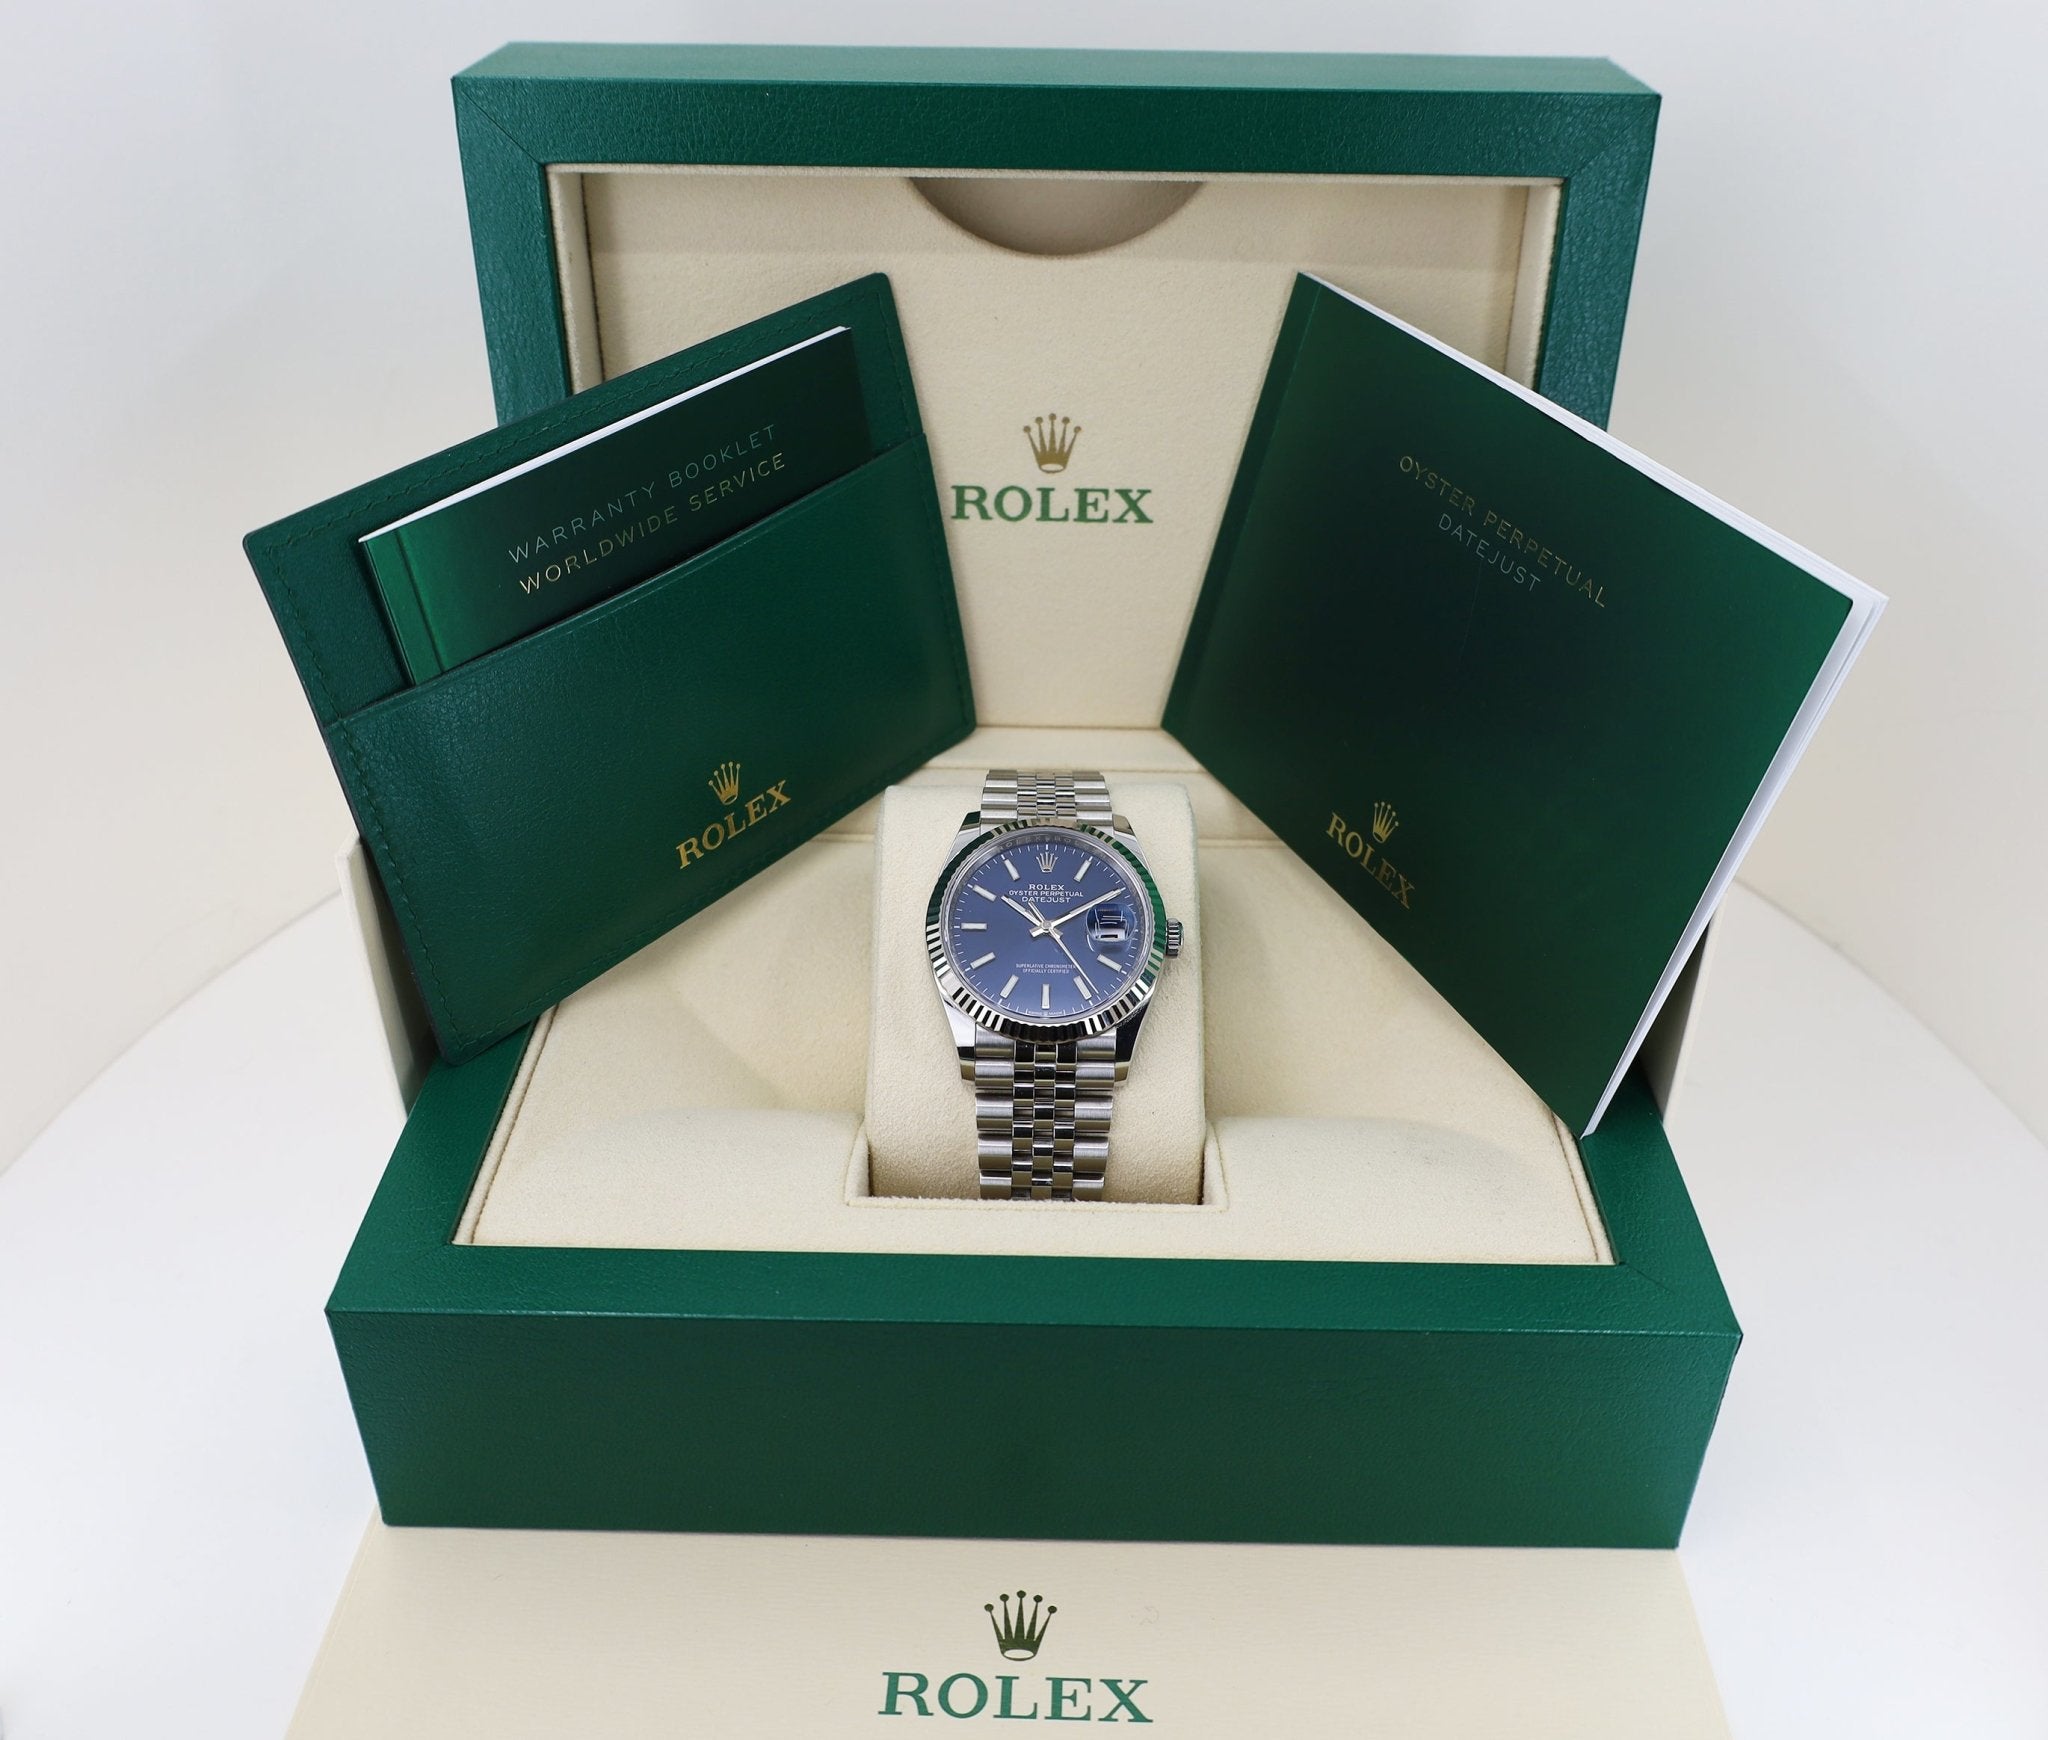 Rolex Datejust 36 Dial Automatic Watch 126234